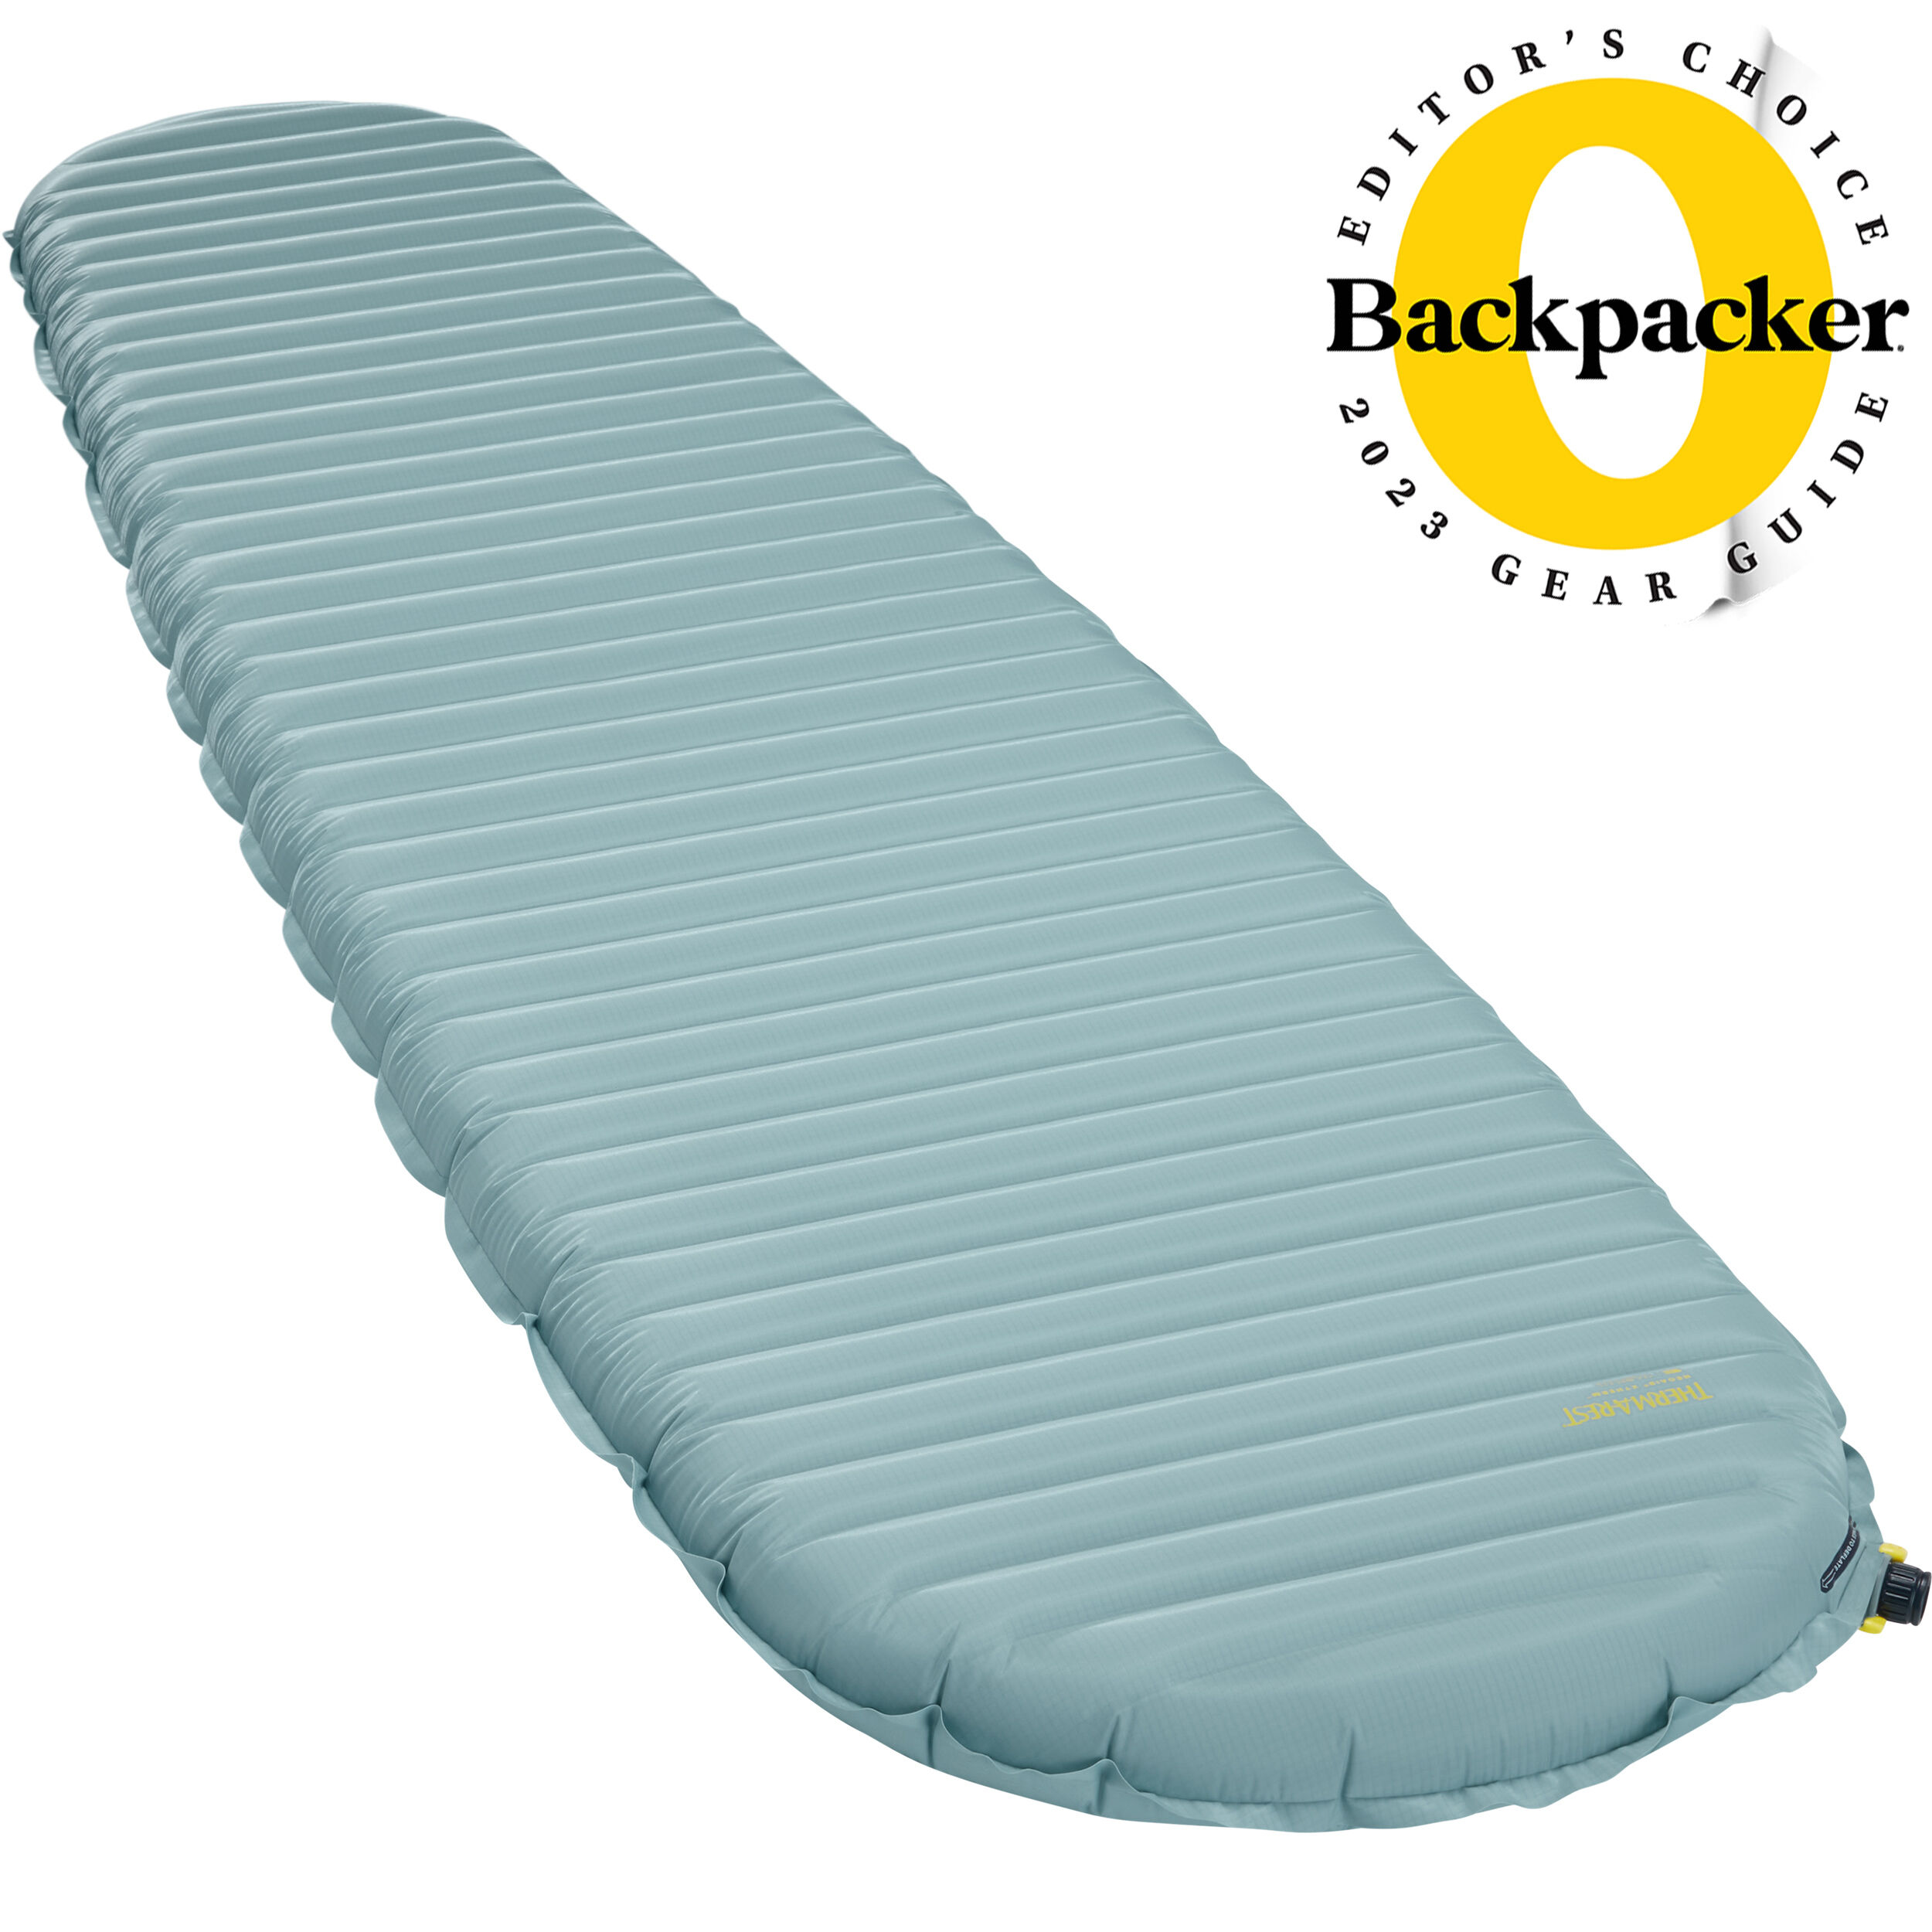 Sleeping Pads | Best Backpacking & Camping | Therm-a-Rest®